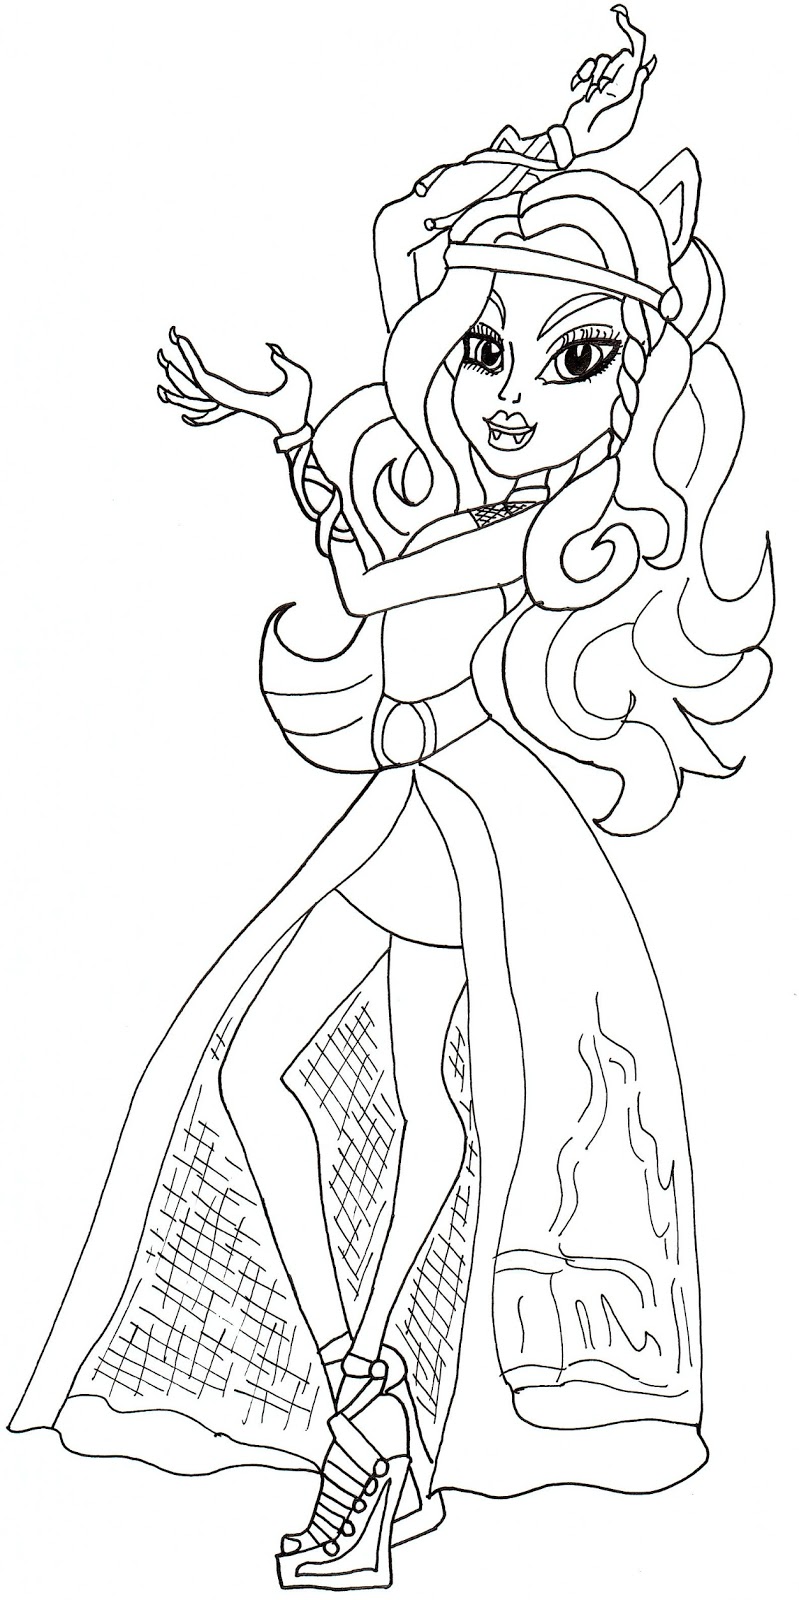 Download Free Printable Monster High Coloring Pages: Clawdeen Haunt the Casbah Coloring Page